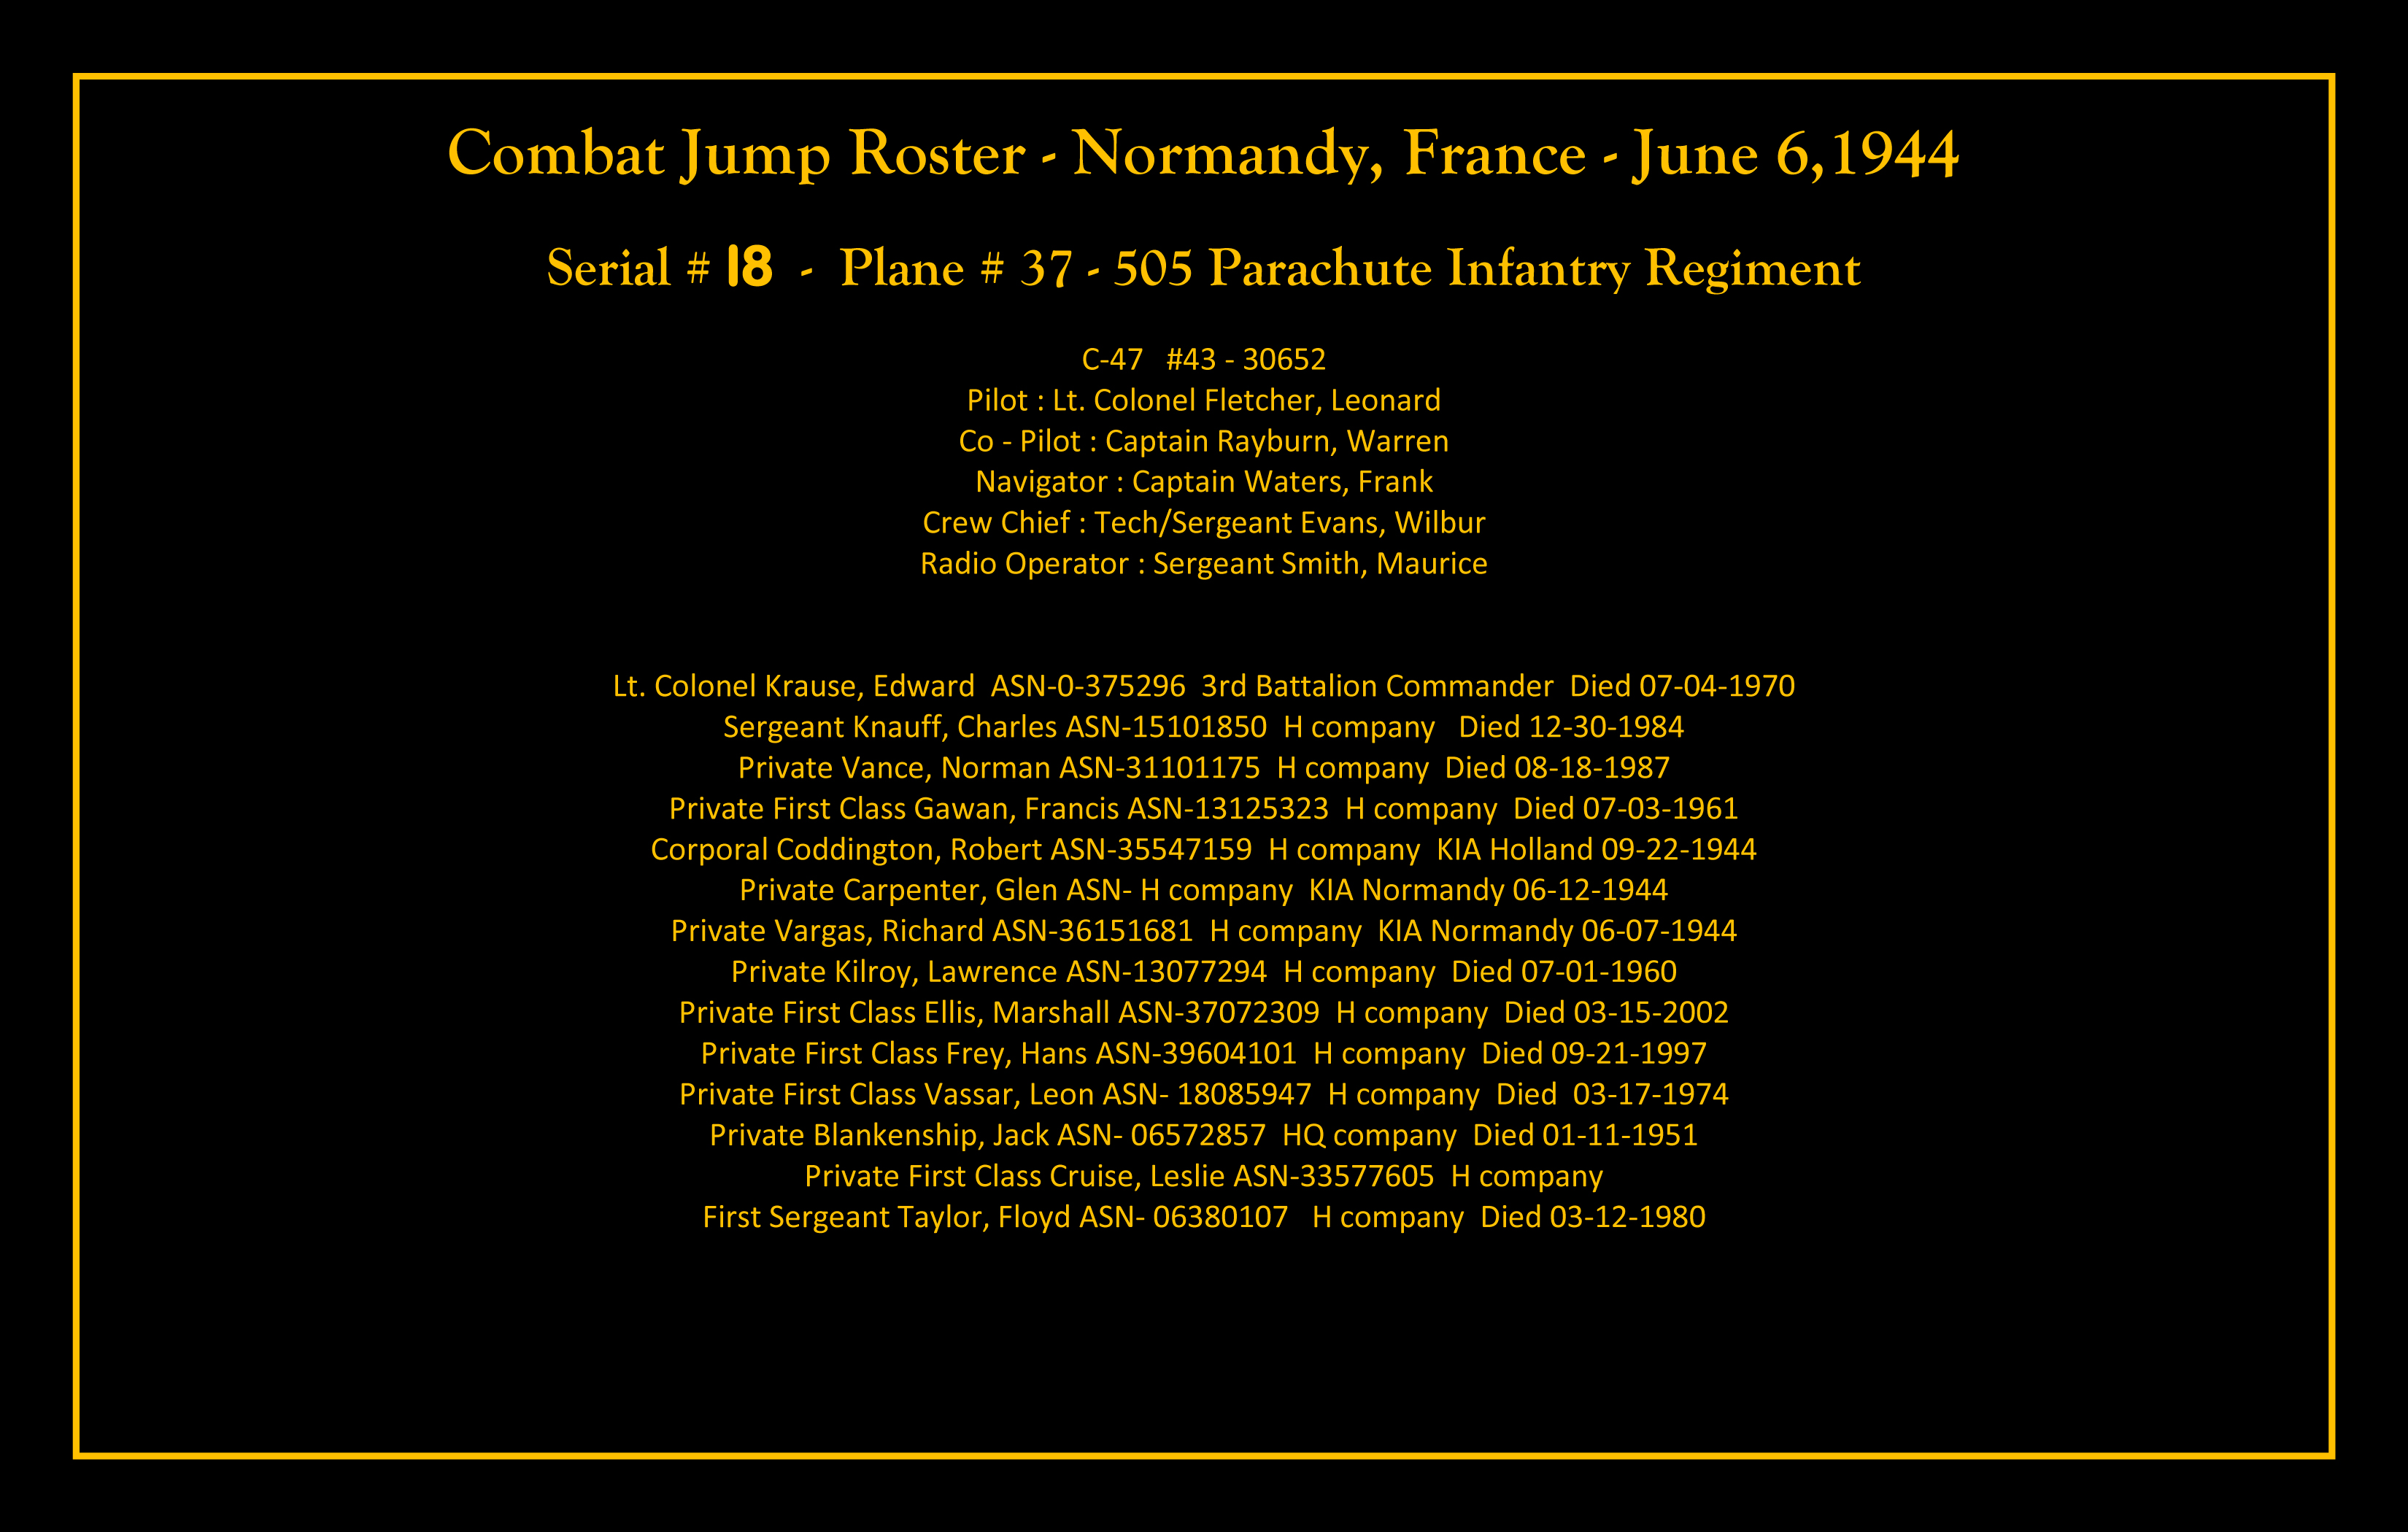 Pfc. Les Cruise C-47 roster for D-Day